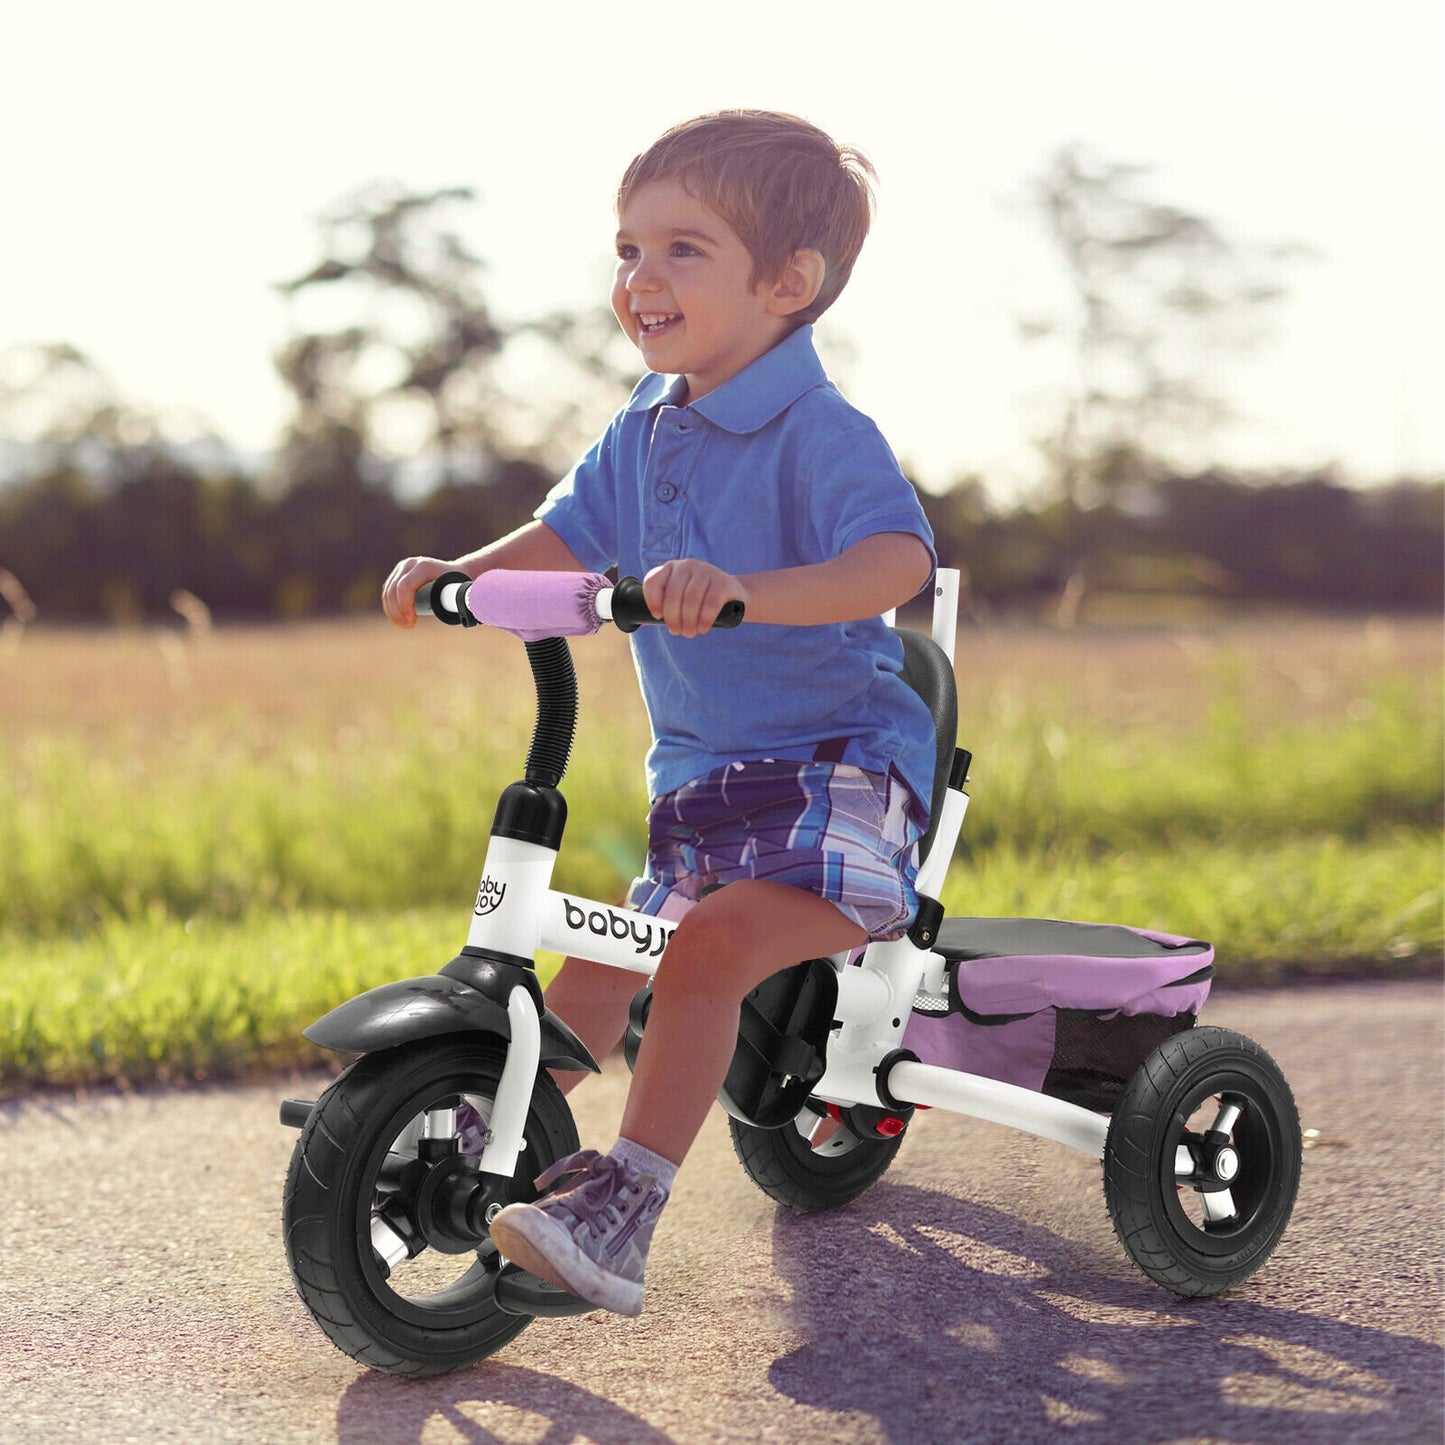 Folding Tricycle Baby Stroller with Reversible Seat and Adjustable Canopy, Pink - Gallery Canada